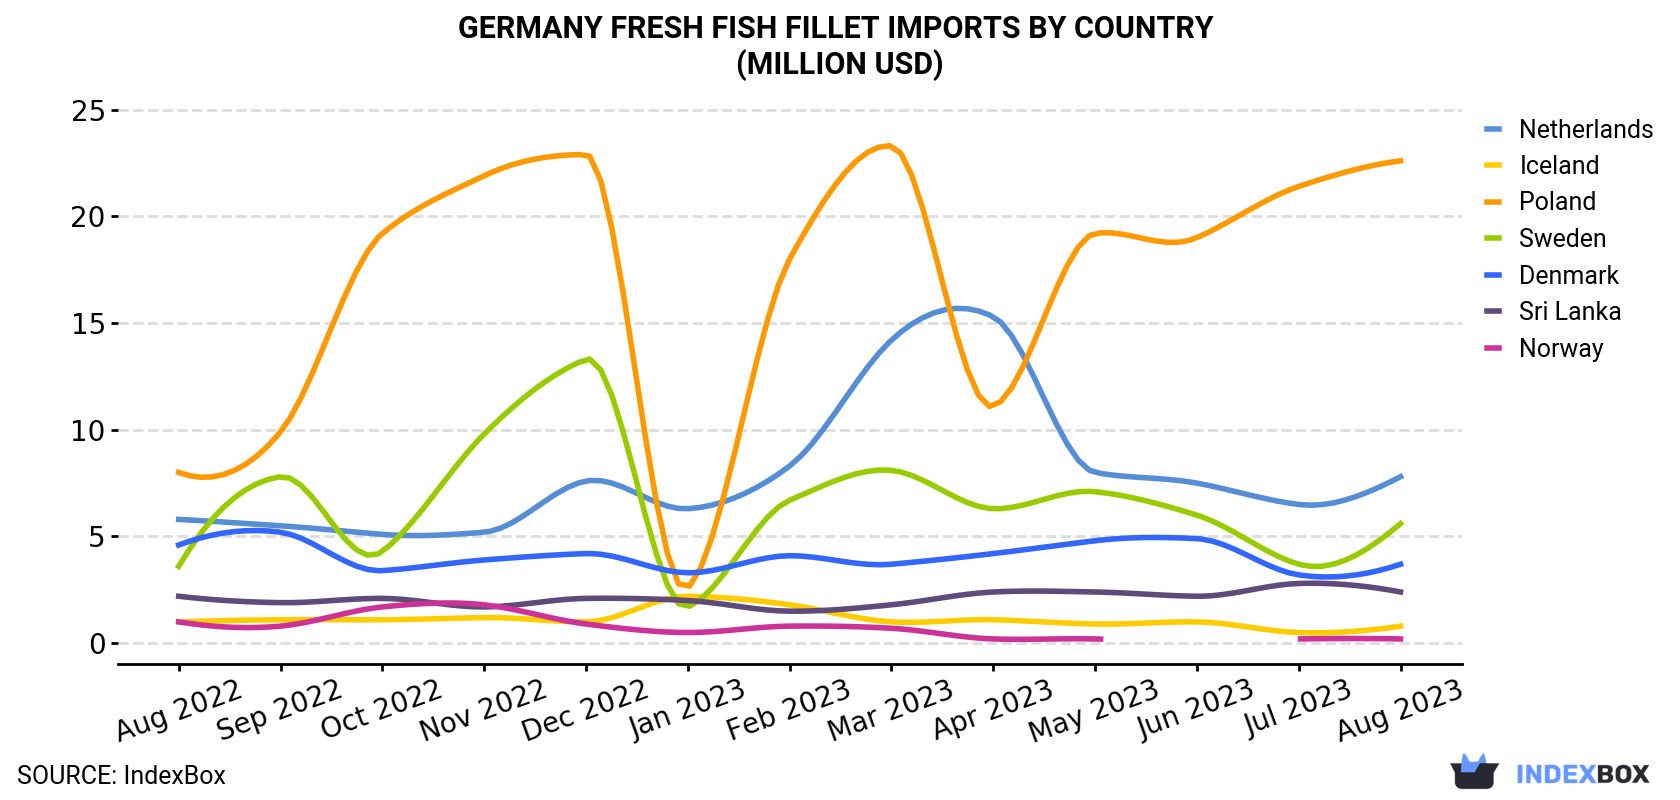 Germany Fresh Fish Fillet Imports By Country (Million USD)